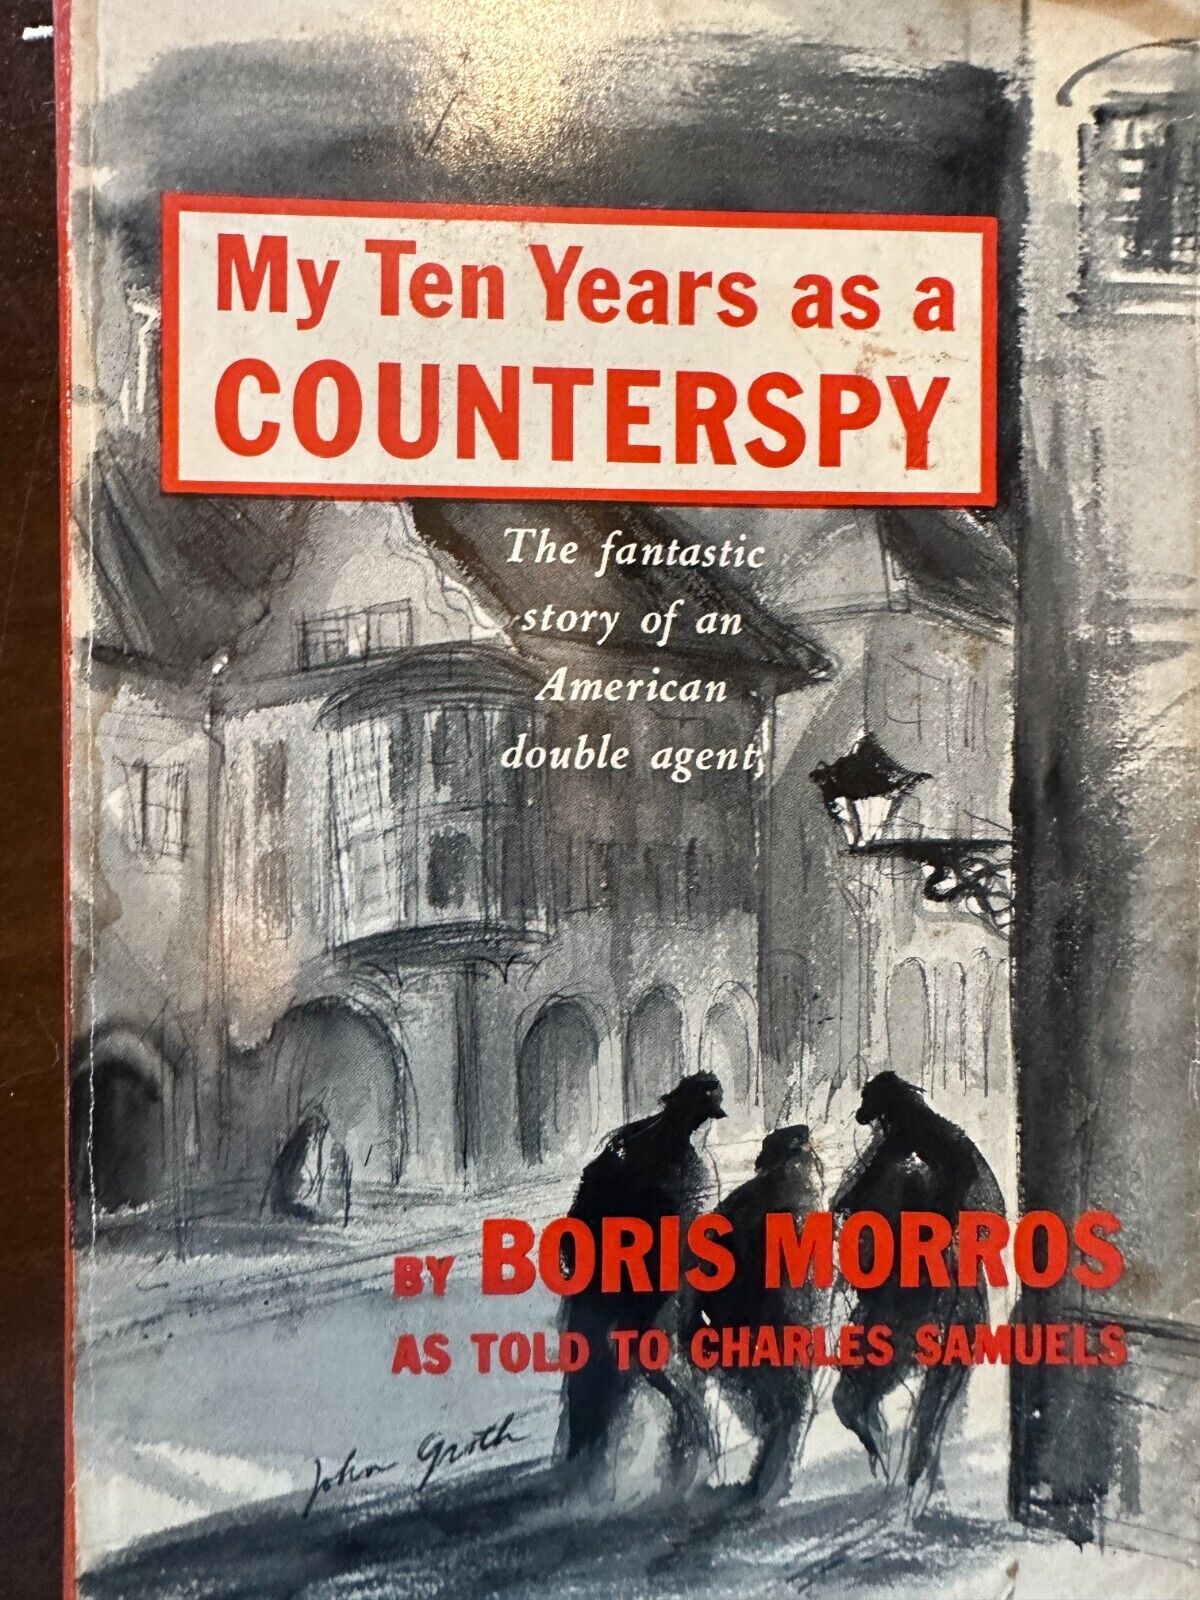 My Ten Years as a Counterspy - Boris Morros - as told to Charles Samuels - 1959